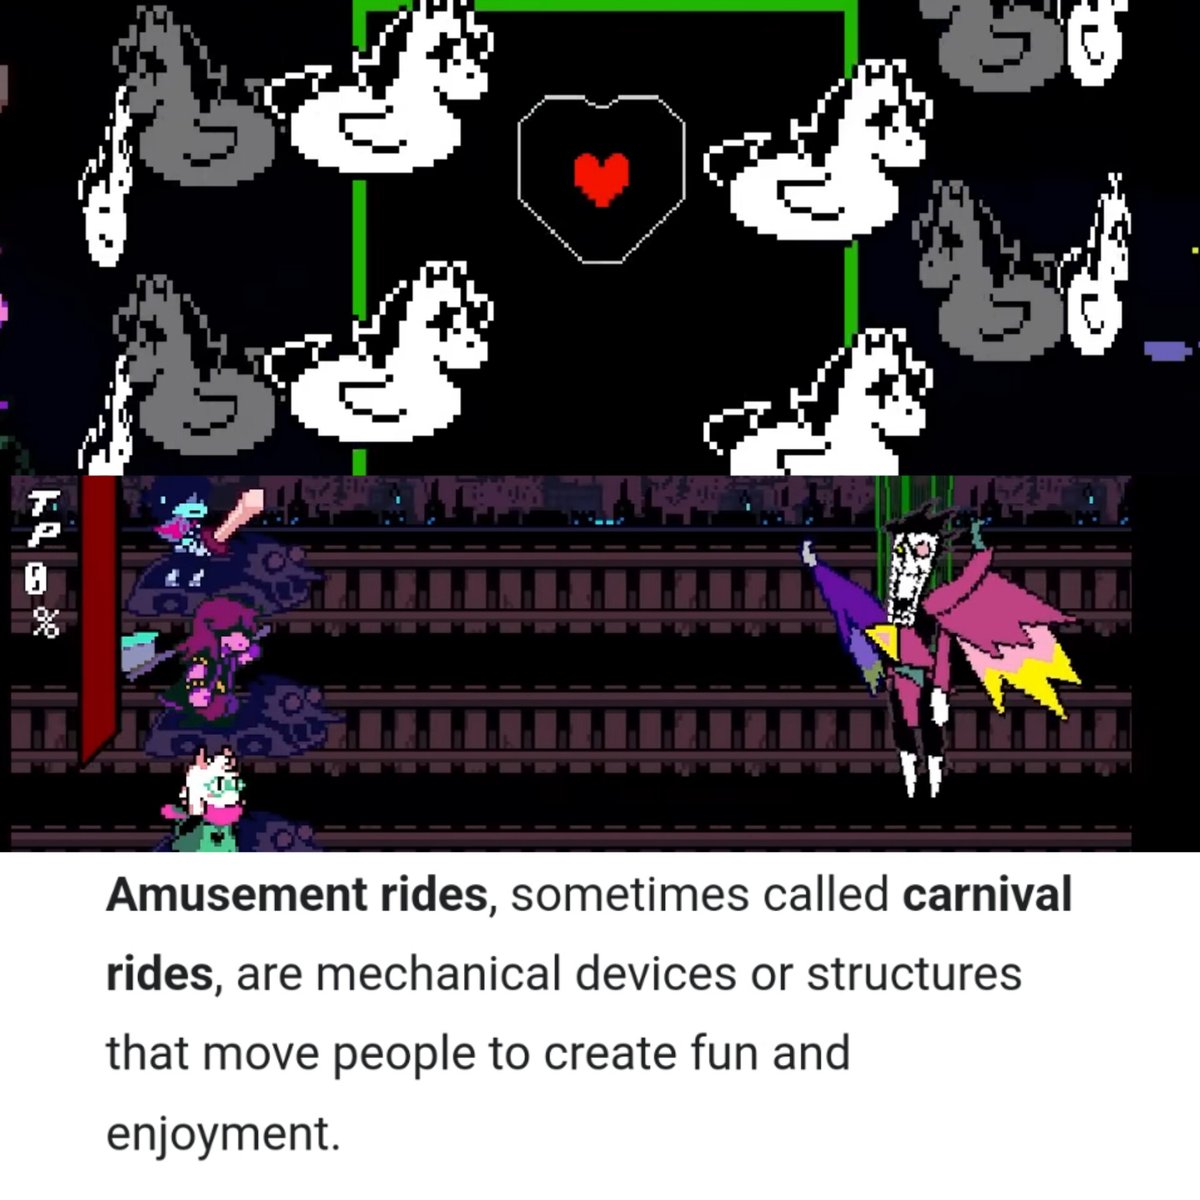 Underrated DR secret boss pattern that I LOVE is the idea that they're all direct entertainment-related. Jevil is a court jester (whose job is to entertain) and uses carousels as attacks. Spamton is a puppet (Puppetry, theatre) and fights you on a roller coaster